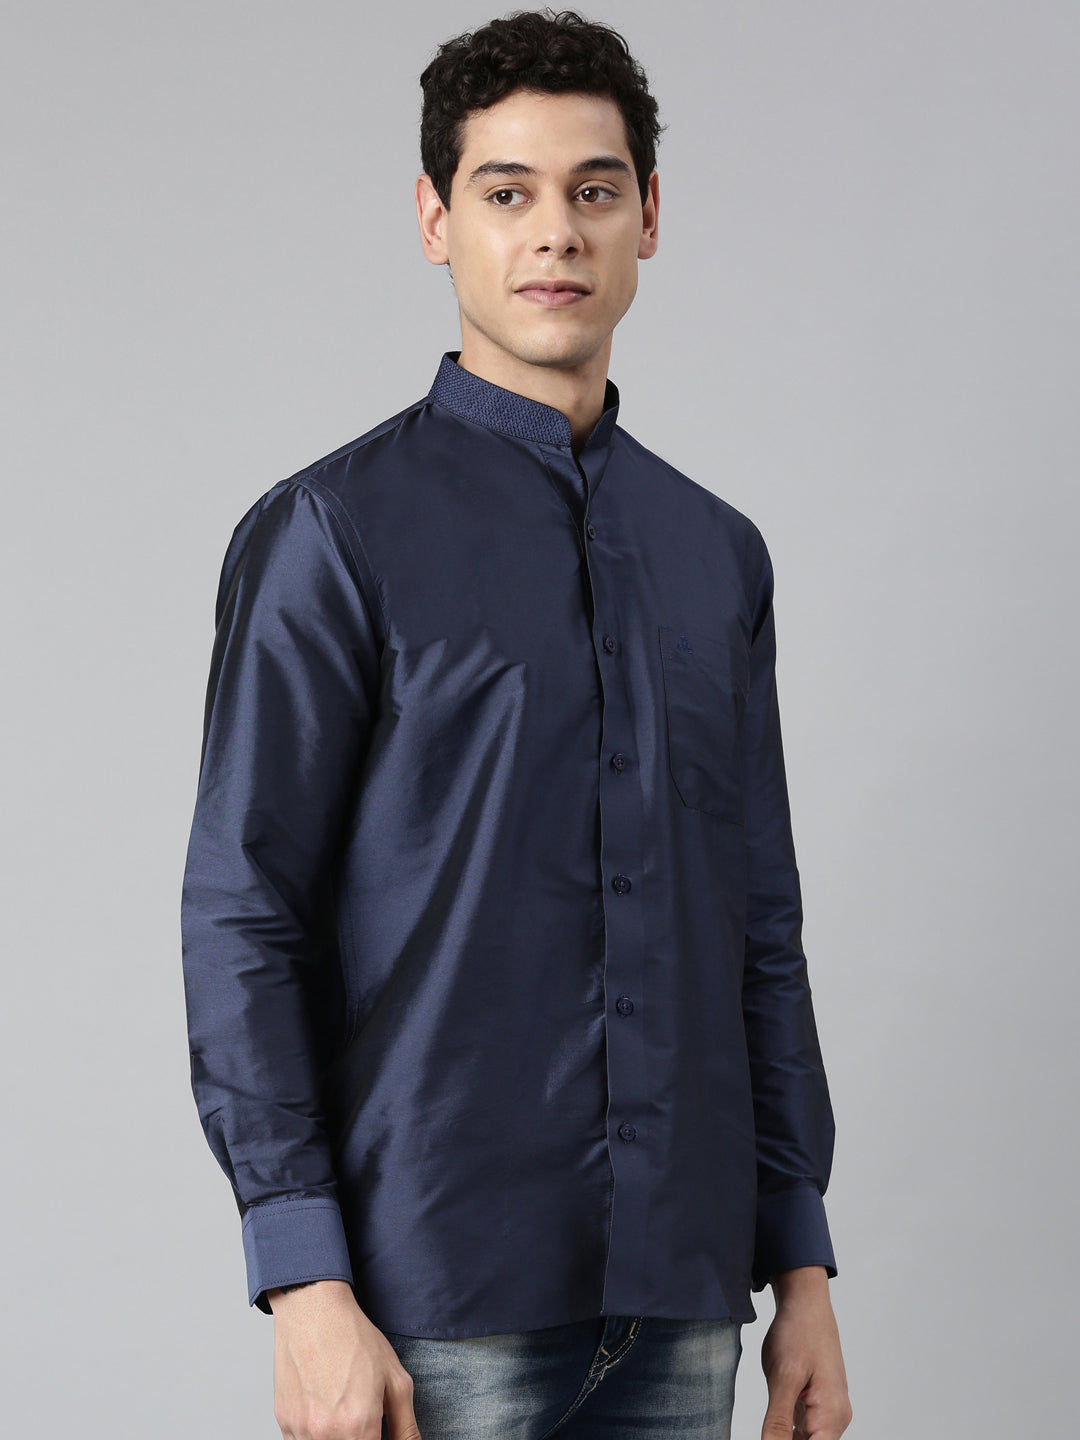 Navy Blue Color Art Silk Slim Fit Solid Party Shirt